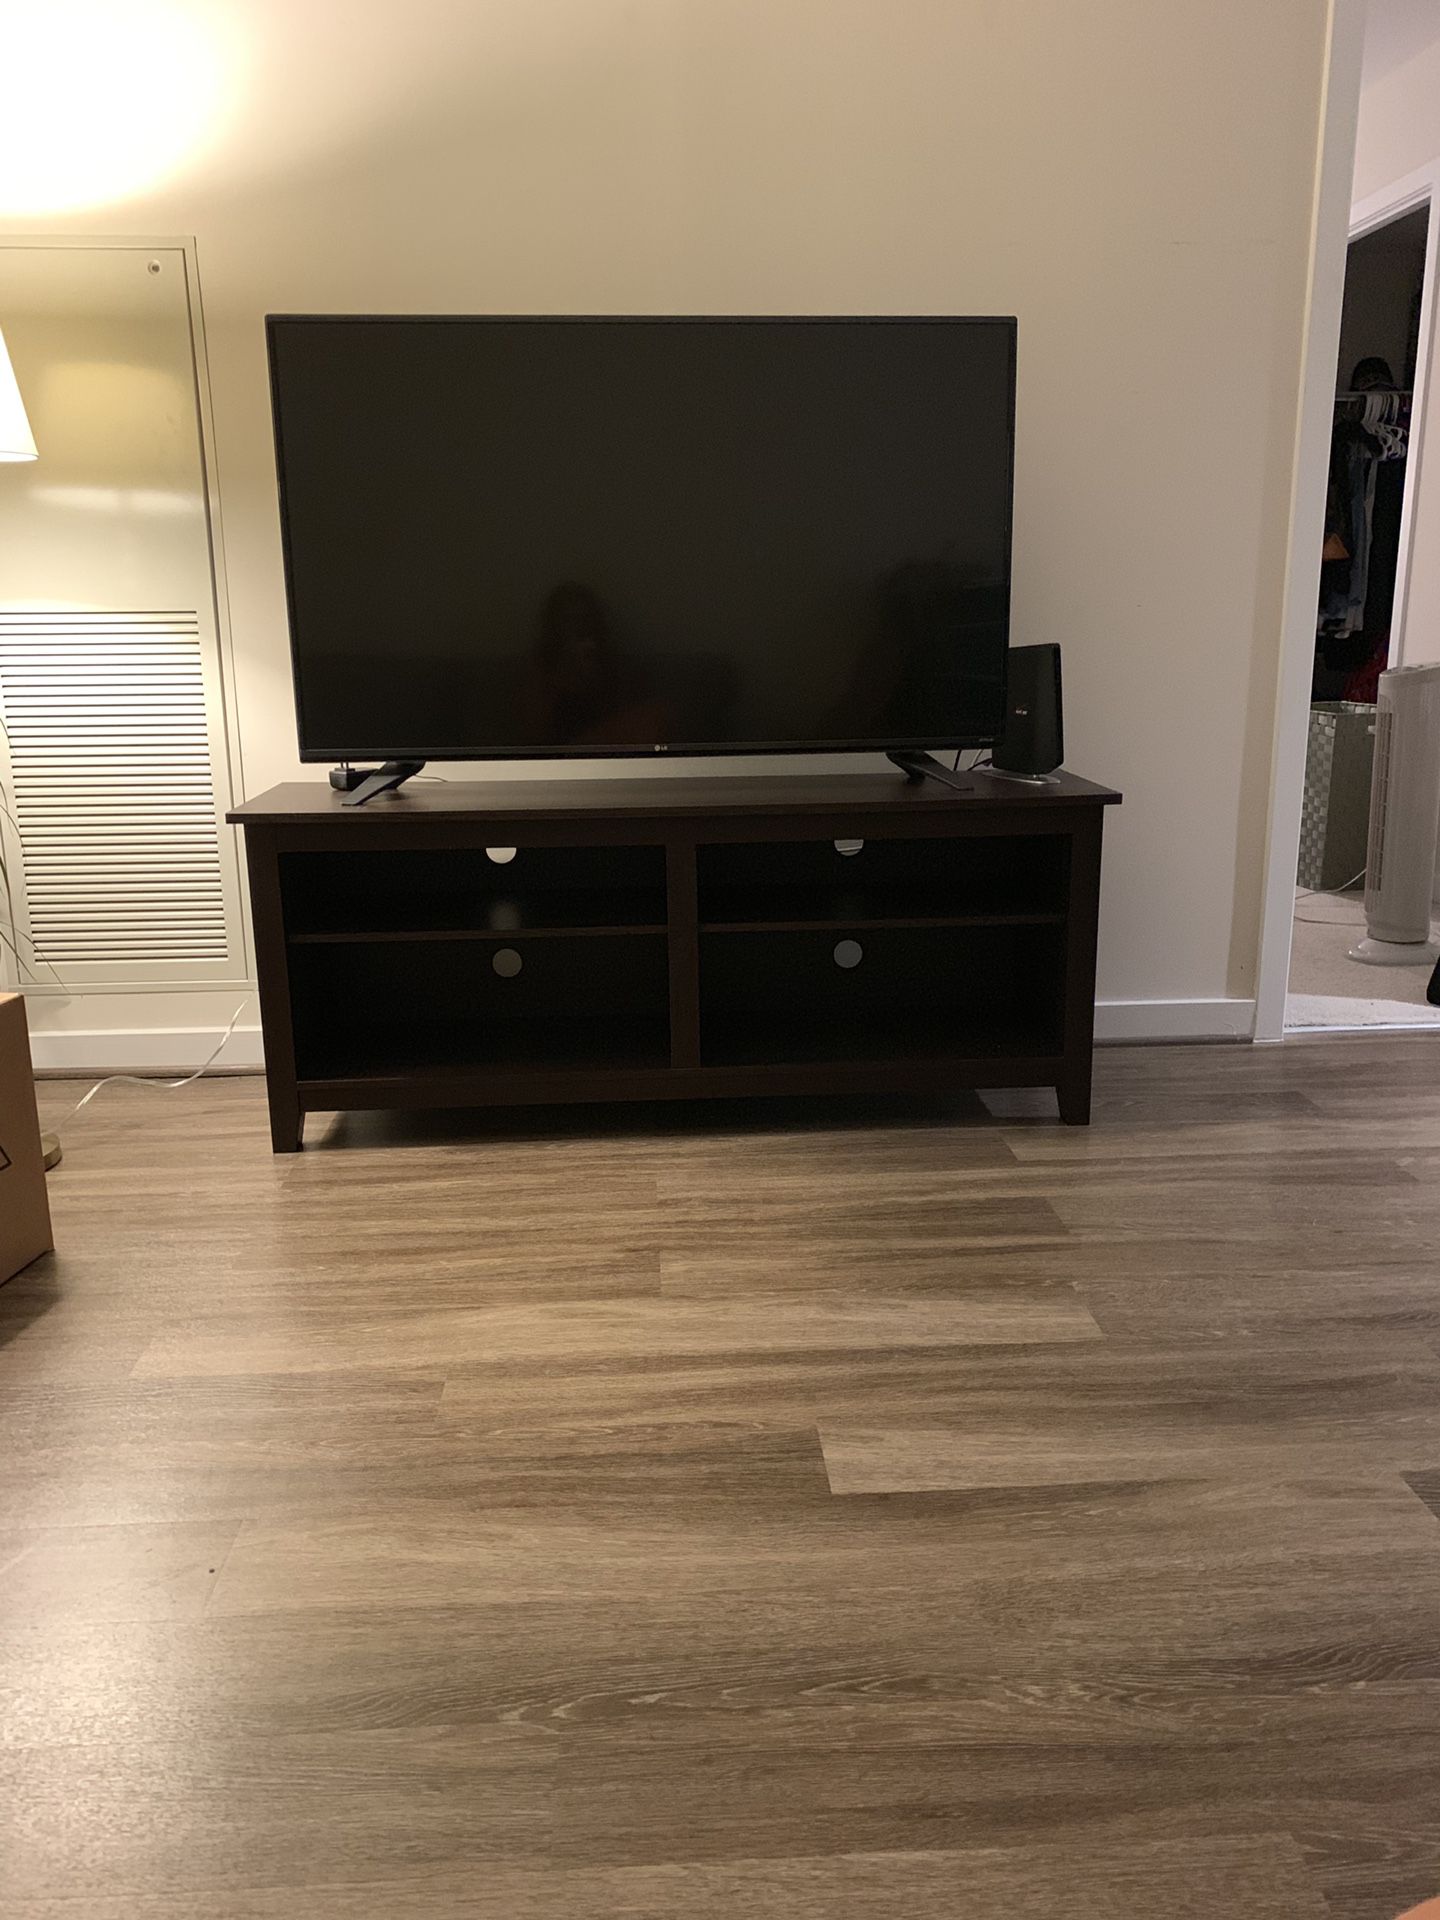 55” LG Smart TV and TV Stand